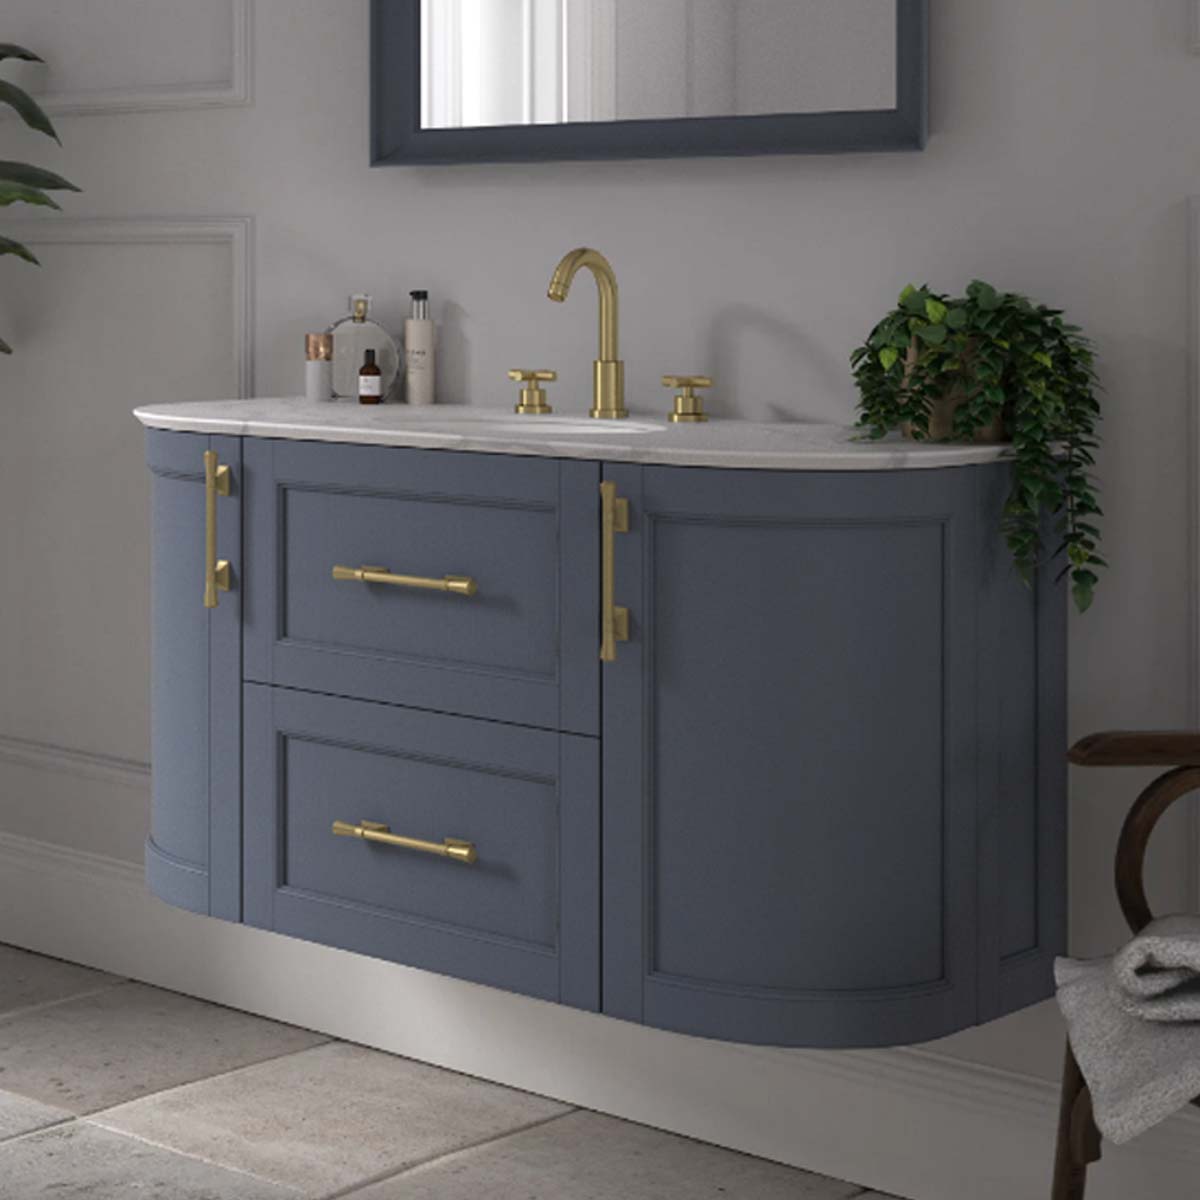 Utopia Roseberry Curved Wall Mounted Vanity Unit With Imperial White Worktop And Solid Surface Undermount Basin Peacock Blue